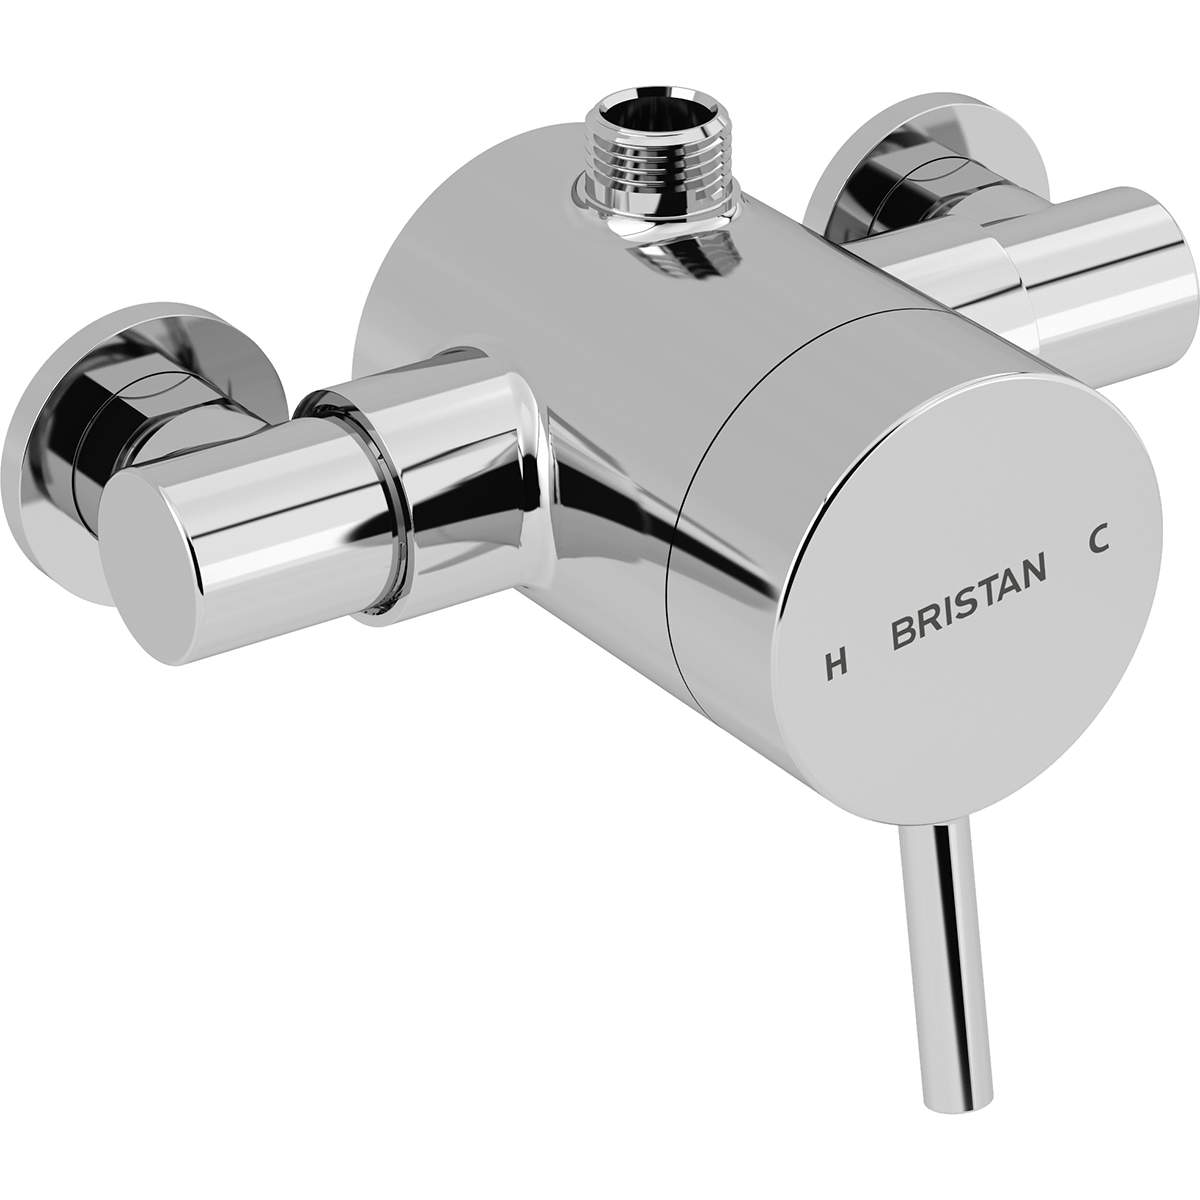 Bristan Prism Exposed Single Control Shower with Top Outlet (PM2 SQSHXTVO C)